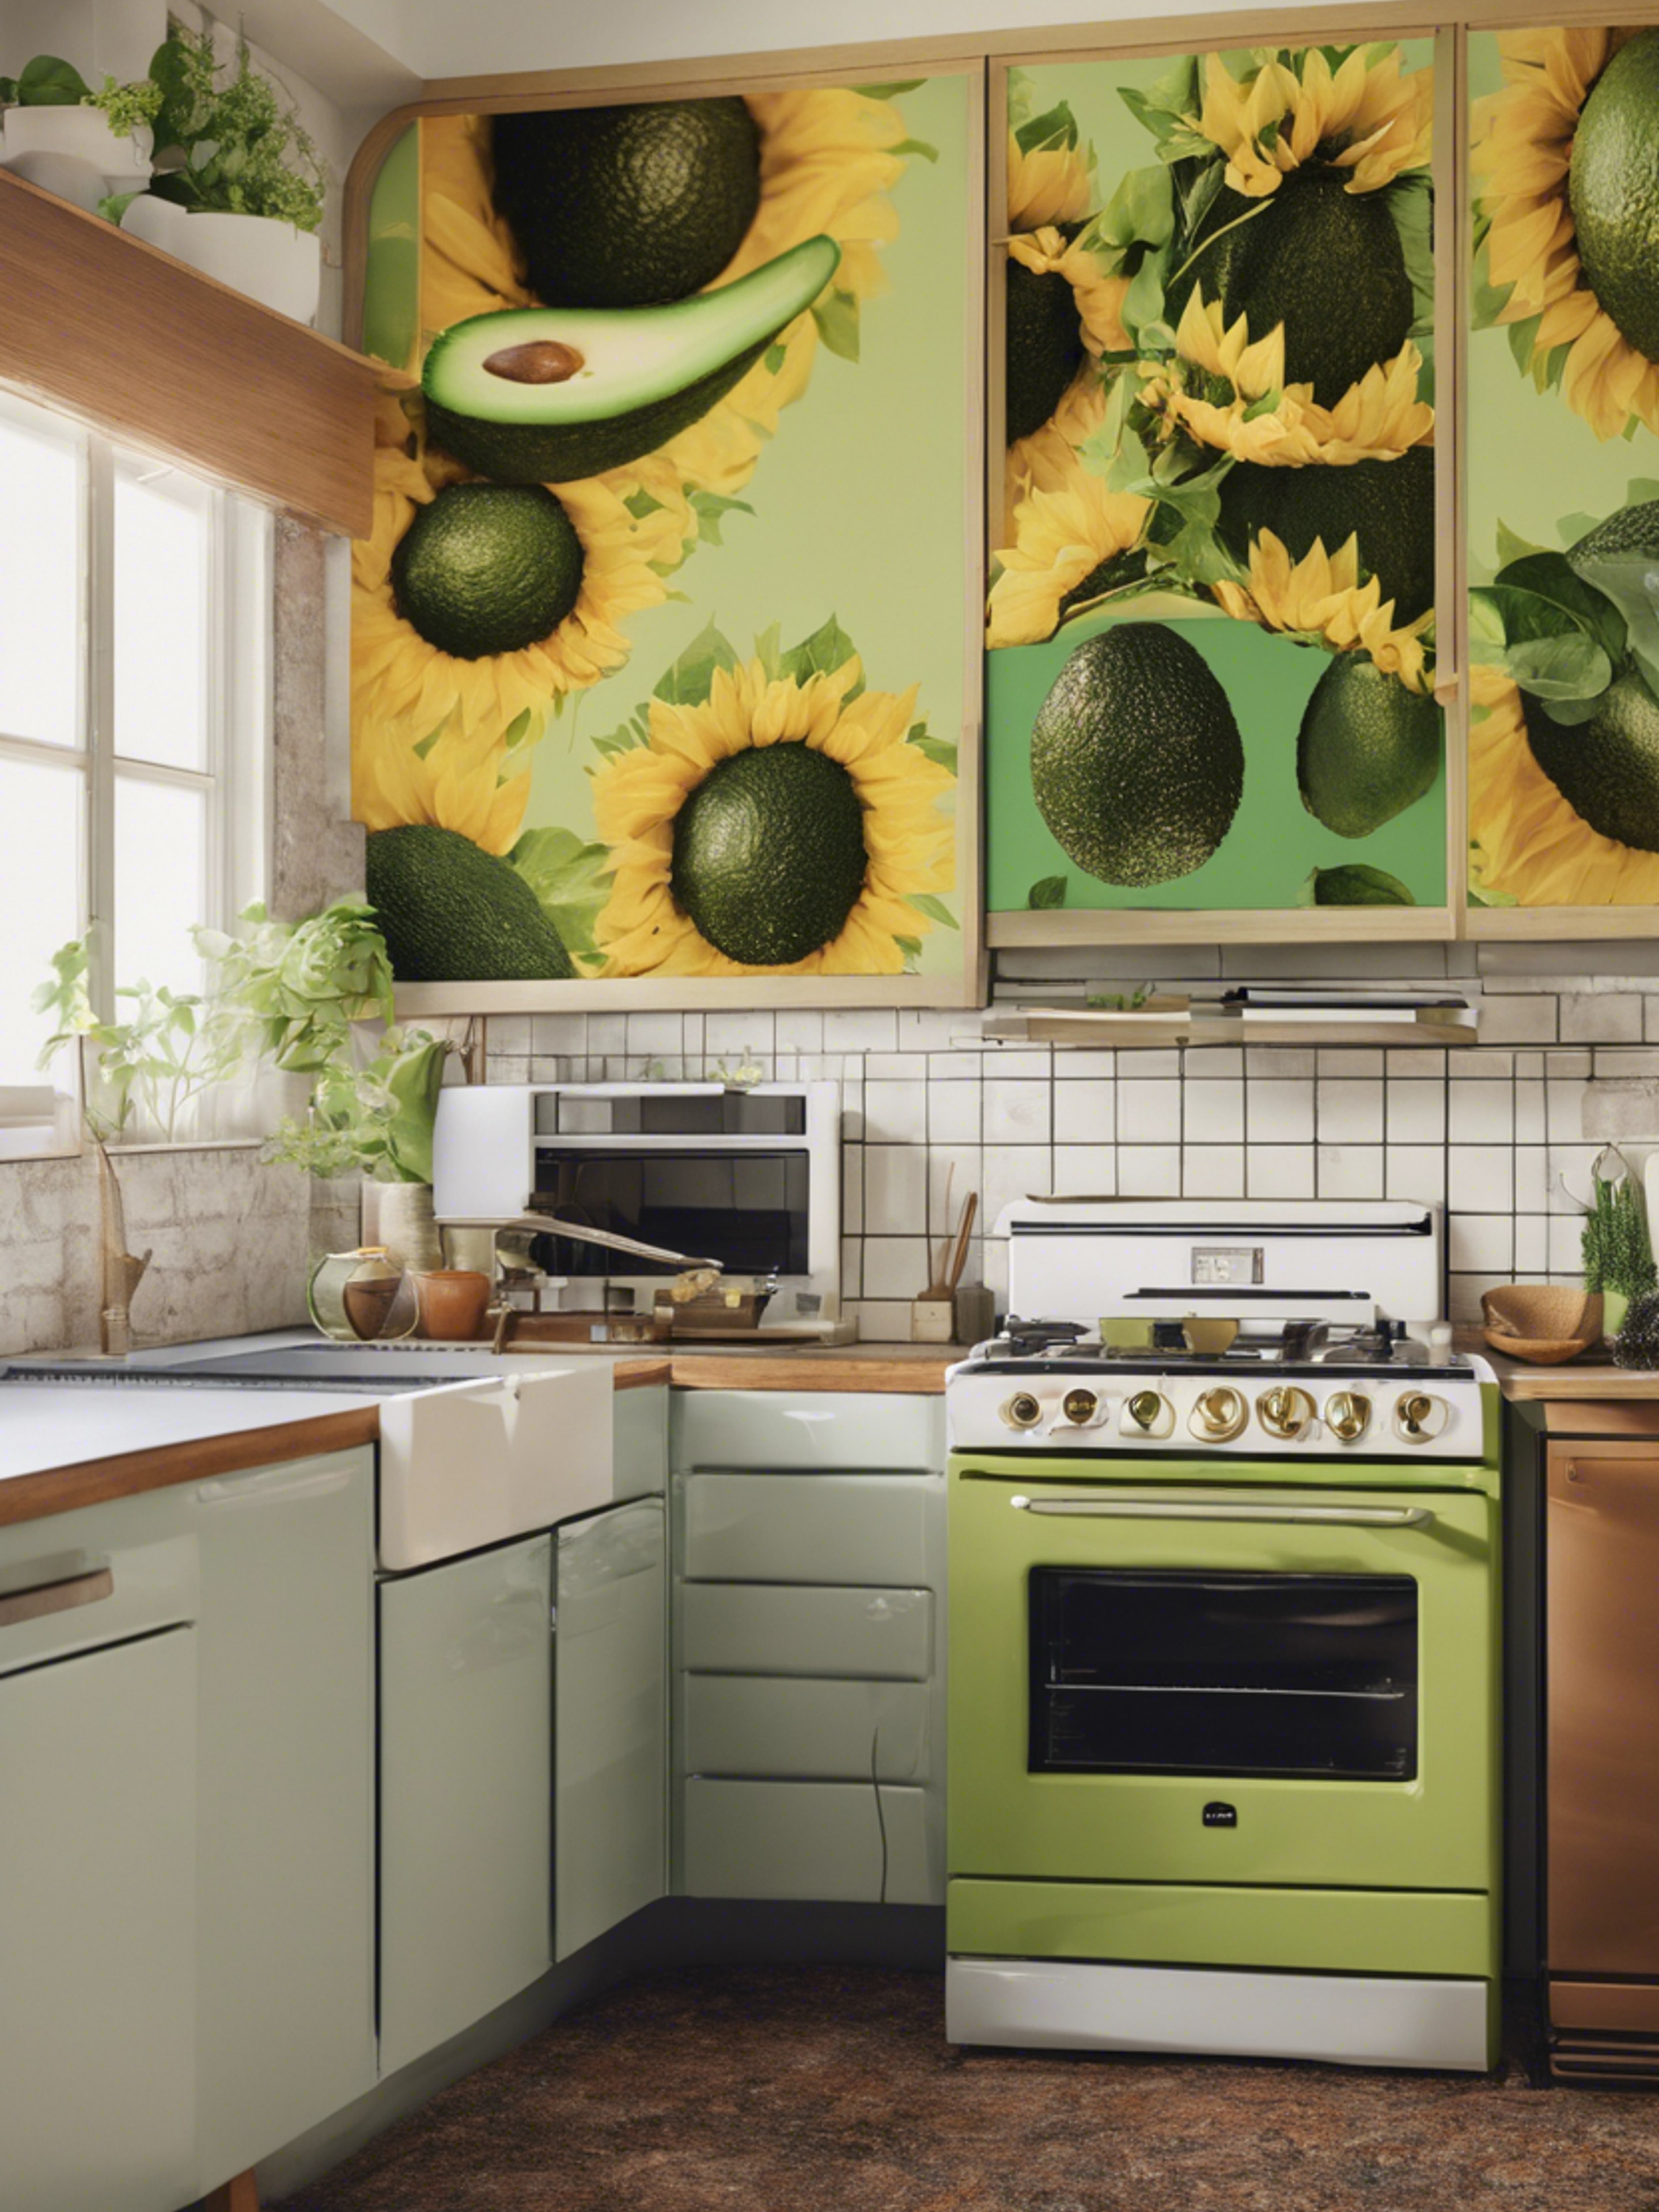 A 70s kitchen with avocado green appliances and oversized sunflower prints Валлпапер[58674ee3cd464da7b0a1]